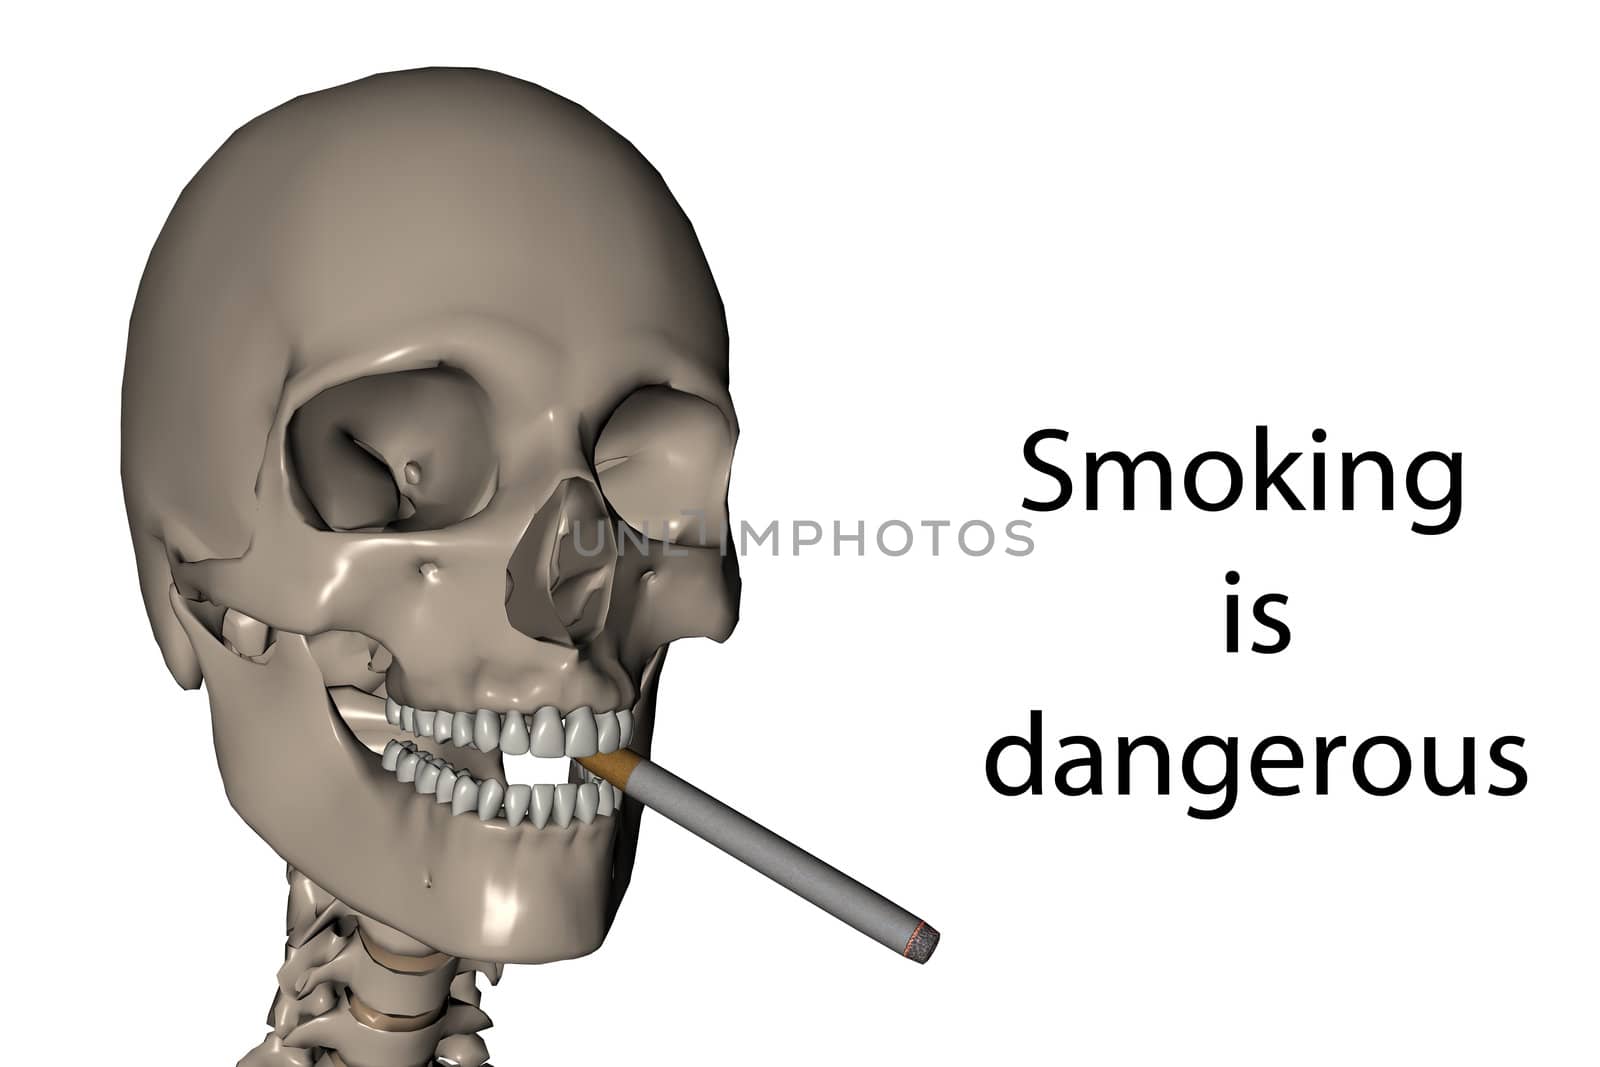 3D rendered smoking skull with text smoking is dangerous